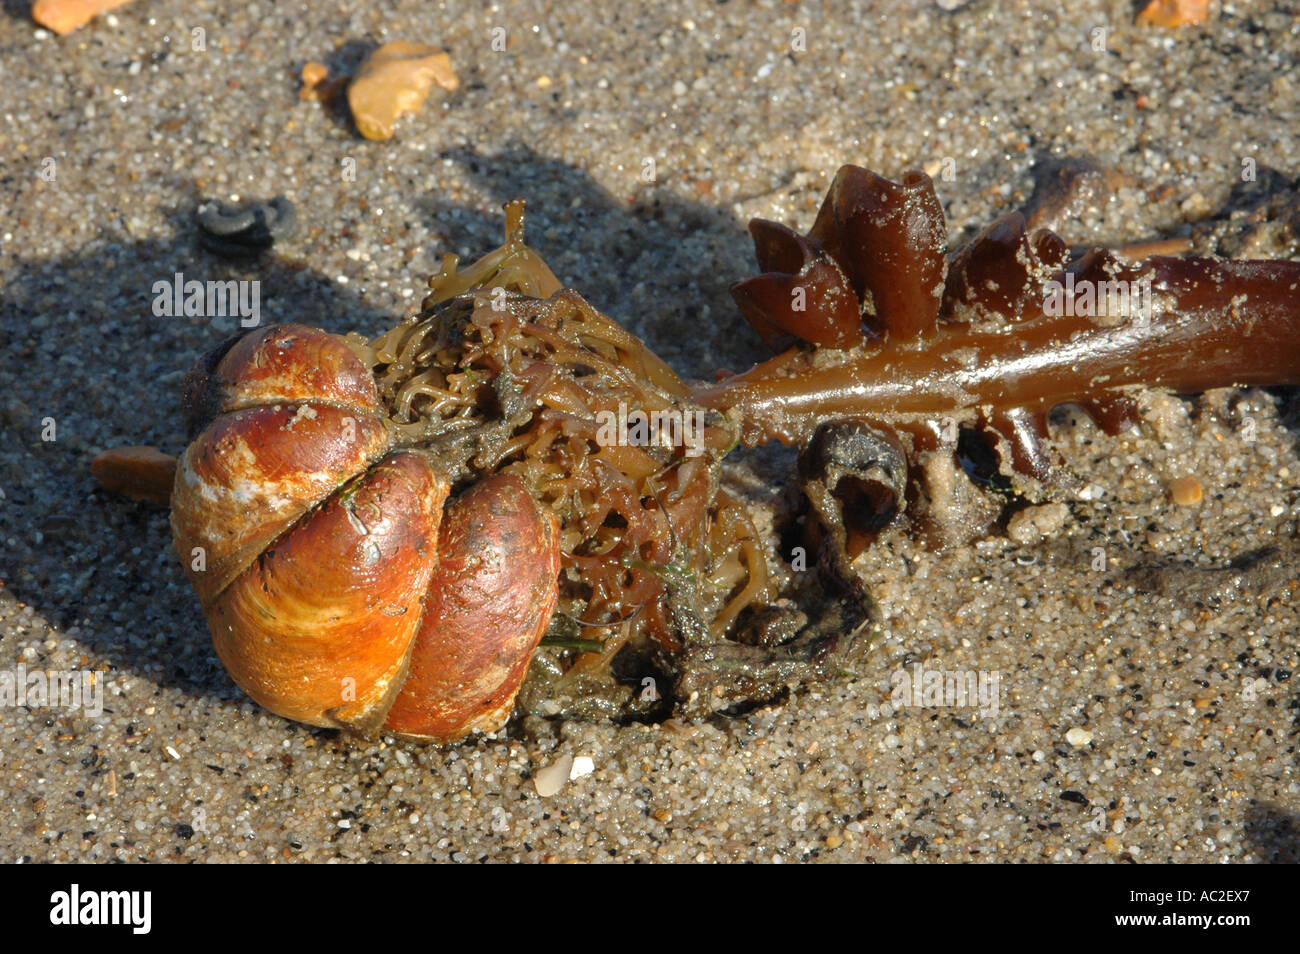 A ‘chain’ of Slipper Limpets pulled from the seabed by seaweed holdfast Stock Photo